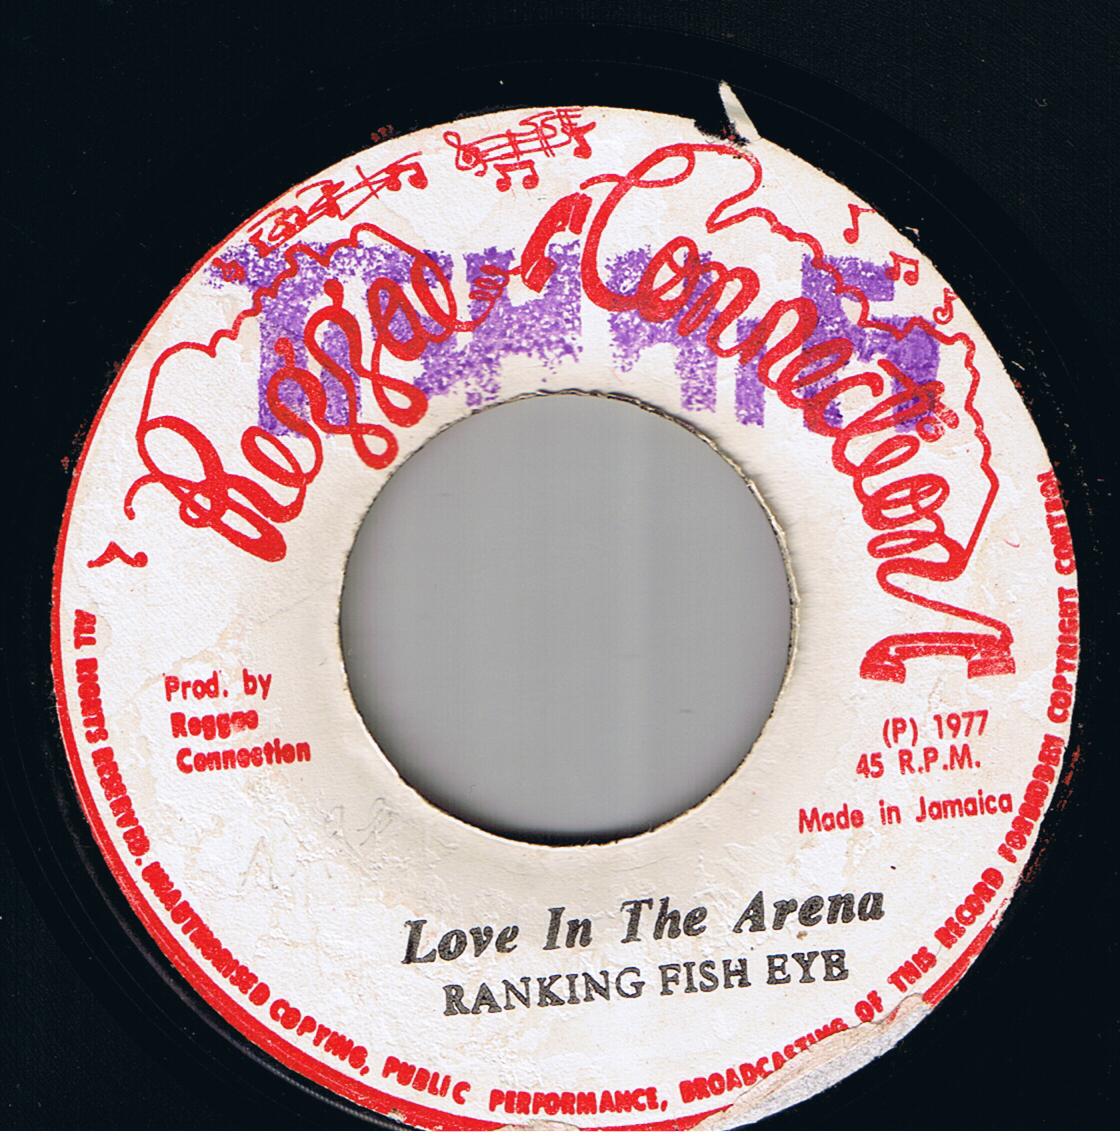 Ranking Fish Eye - Love In The Arena / Version (7")